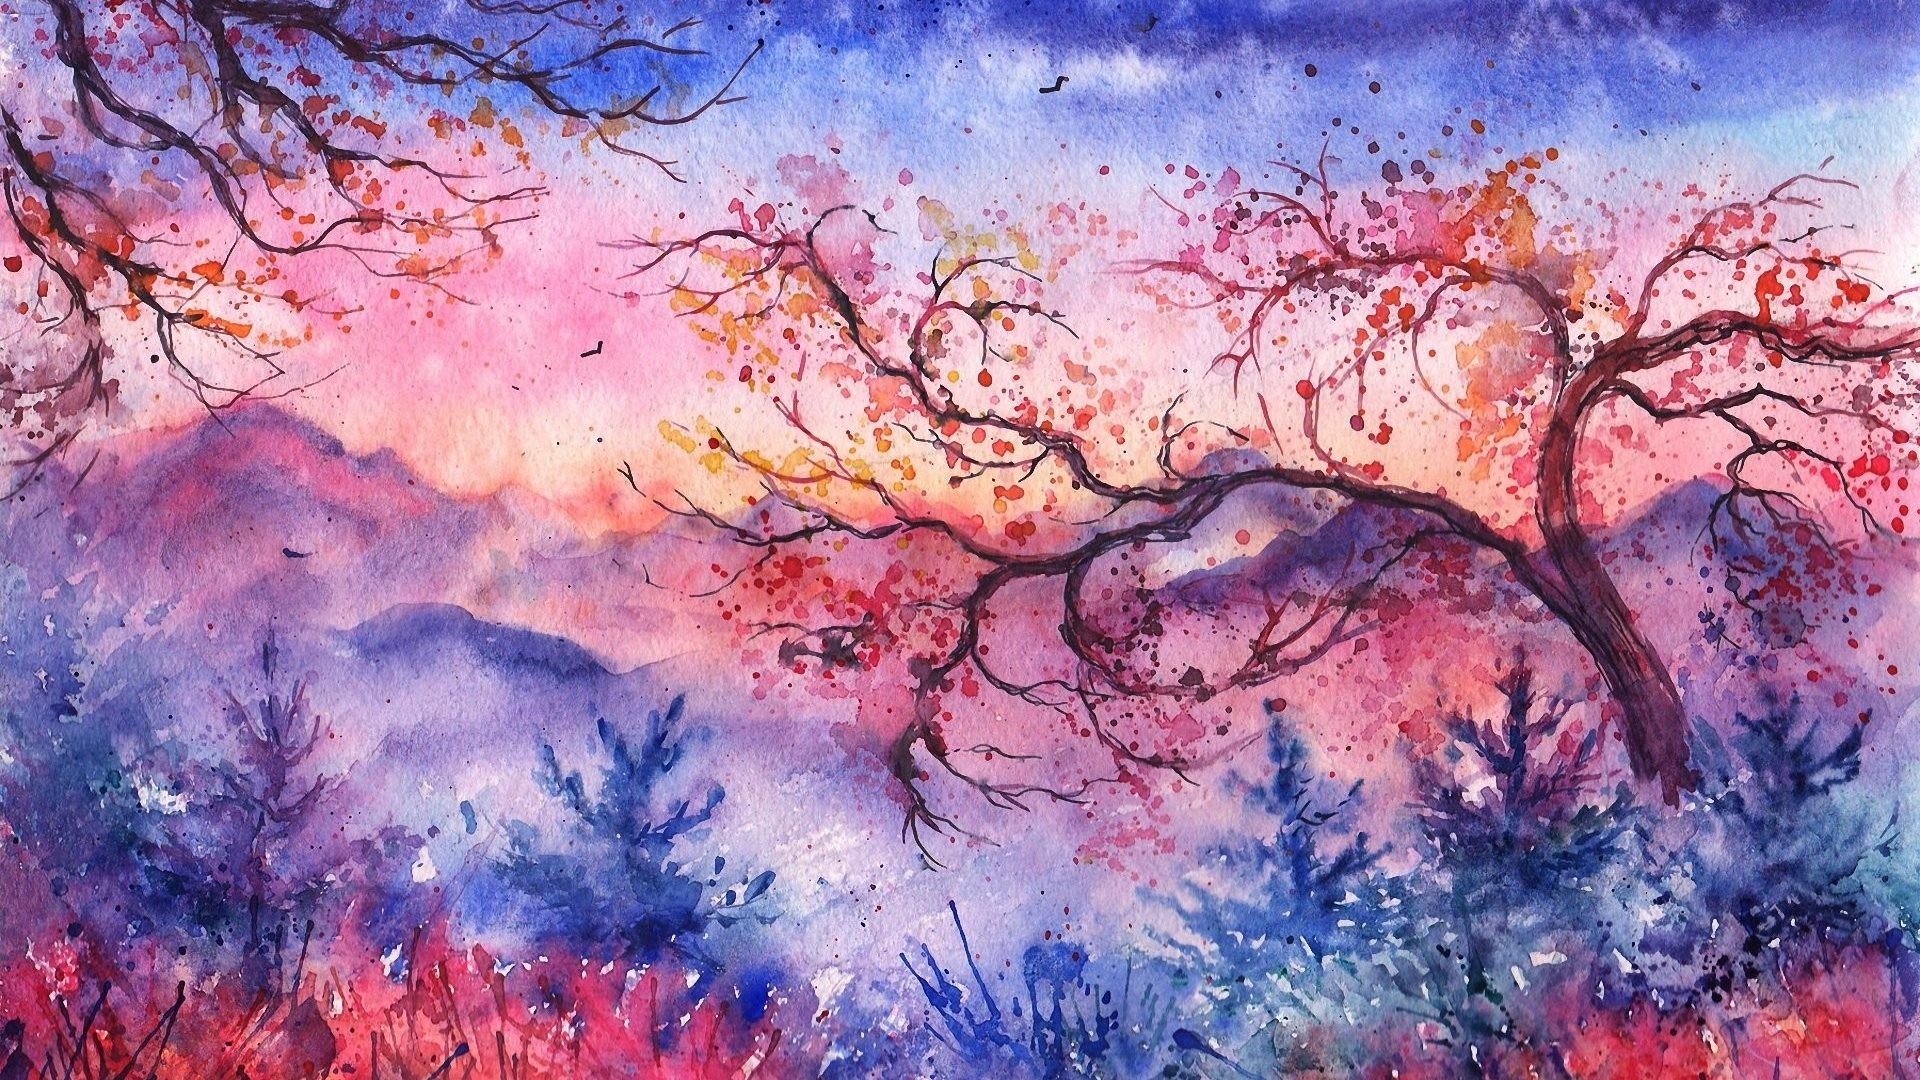 1920x1080 Painted Tag - Christmas Landscape Trees Foliage Watercolor Birds Painted  Evening Sunset Mountains Abstract Nature Wallpaper